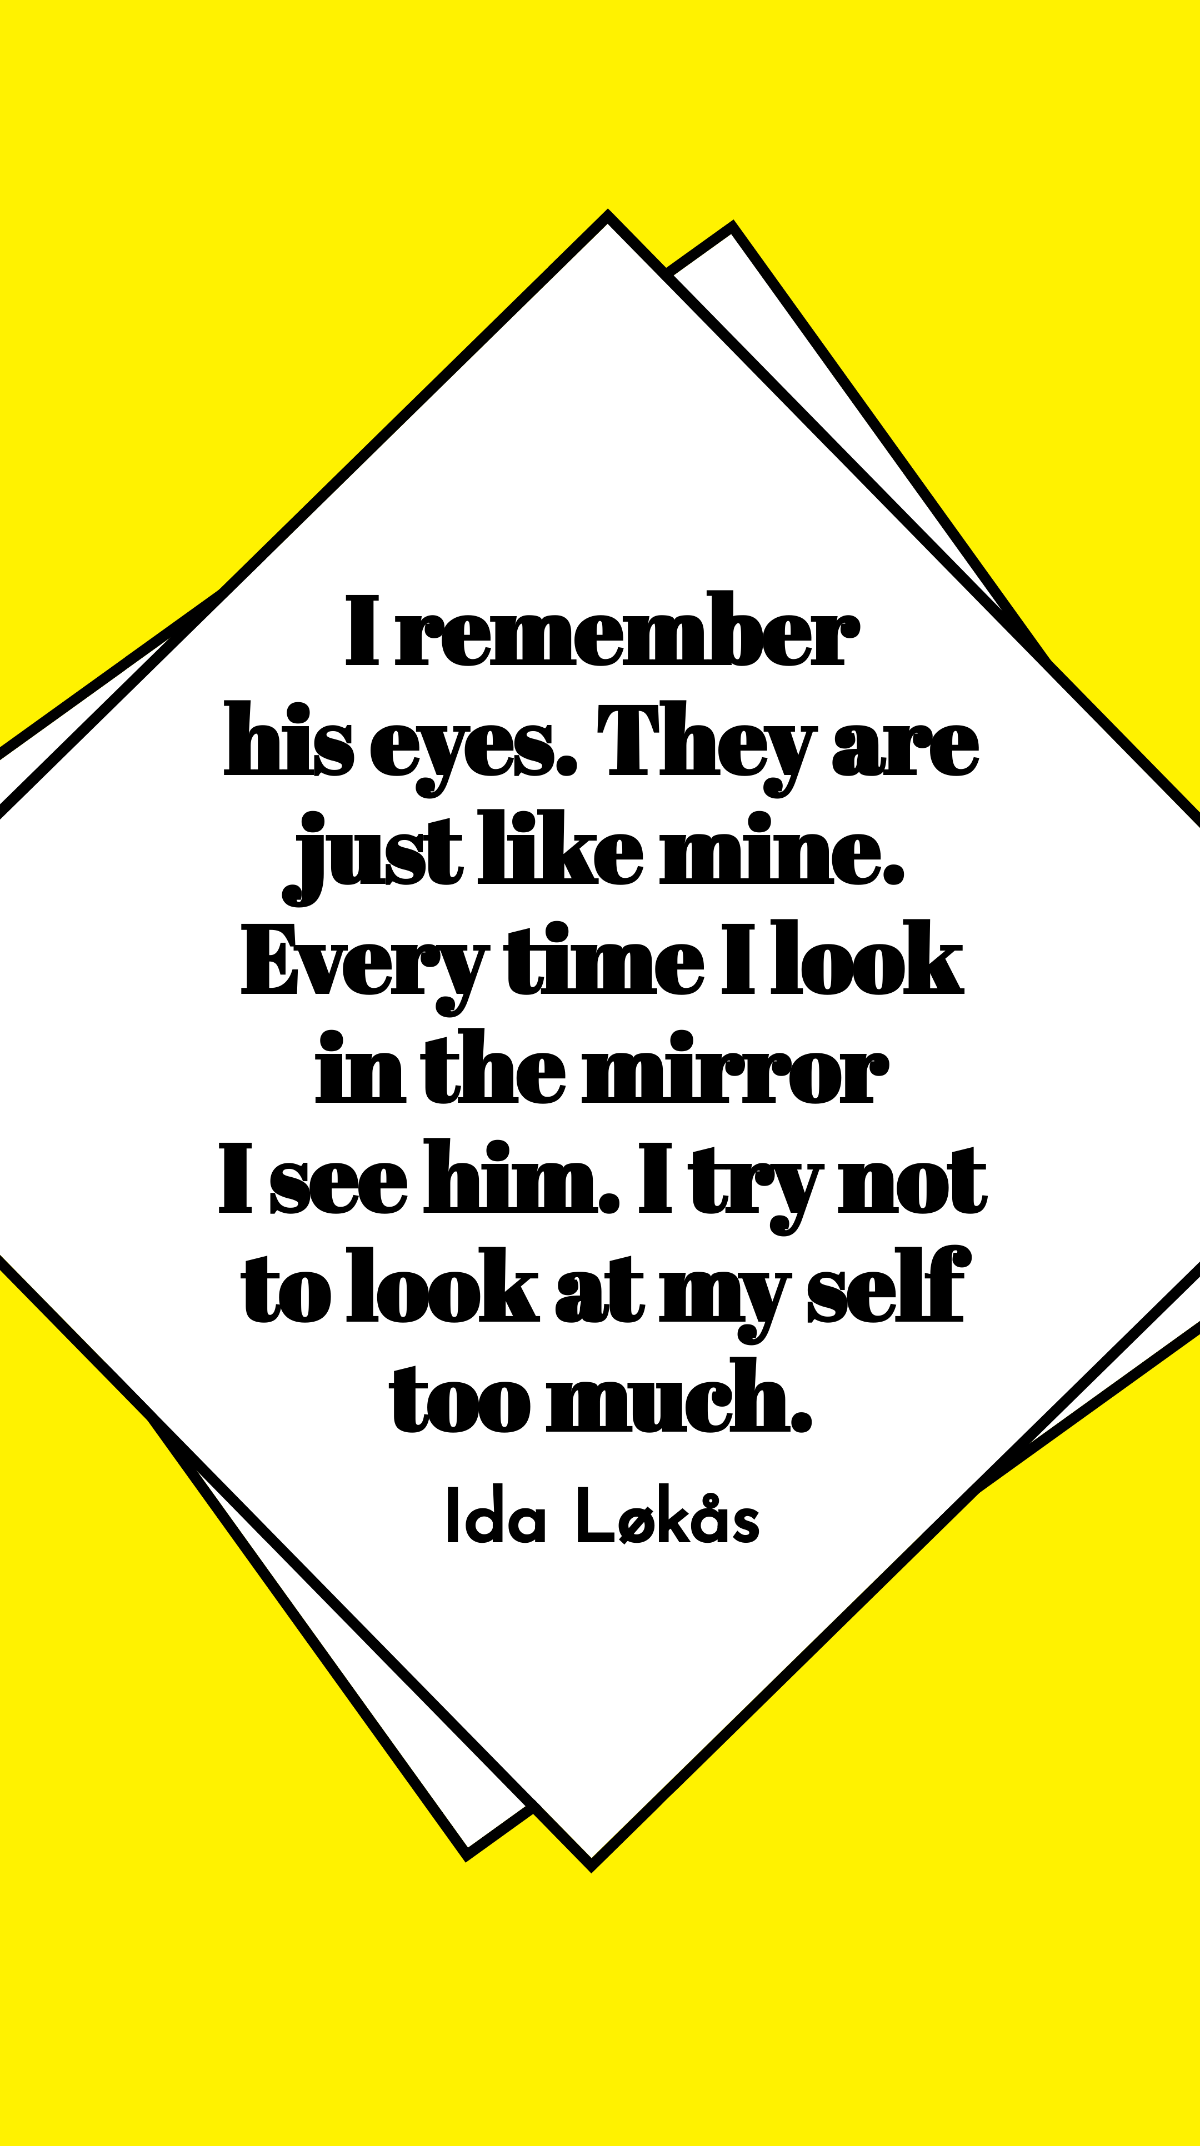 Free Ida Løkås - I remember his eyes. They are just like mine. Every time I look in the mirror I see him. I try not to look at my self too much. Template